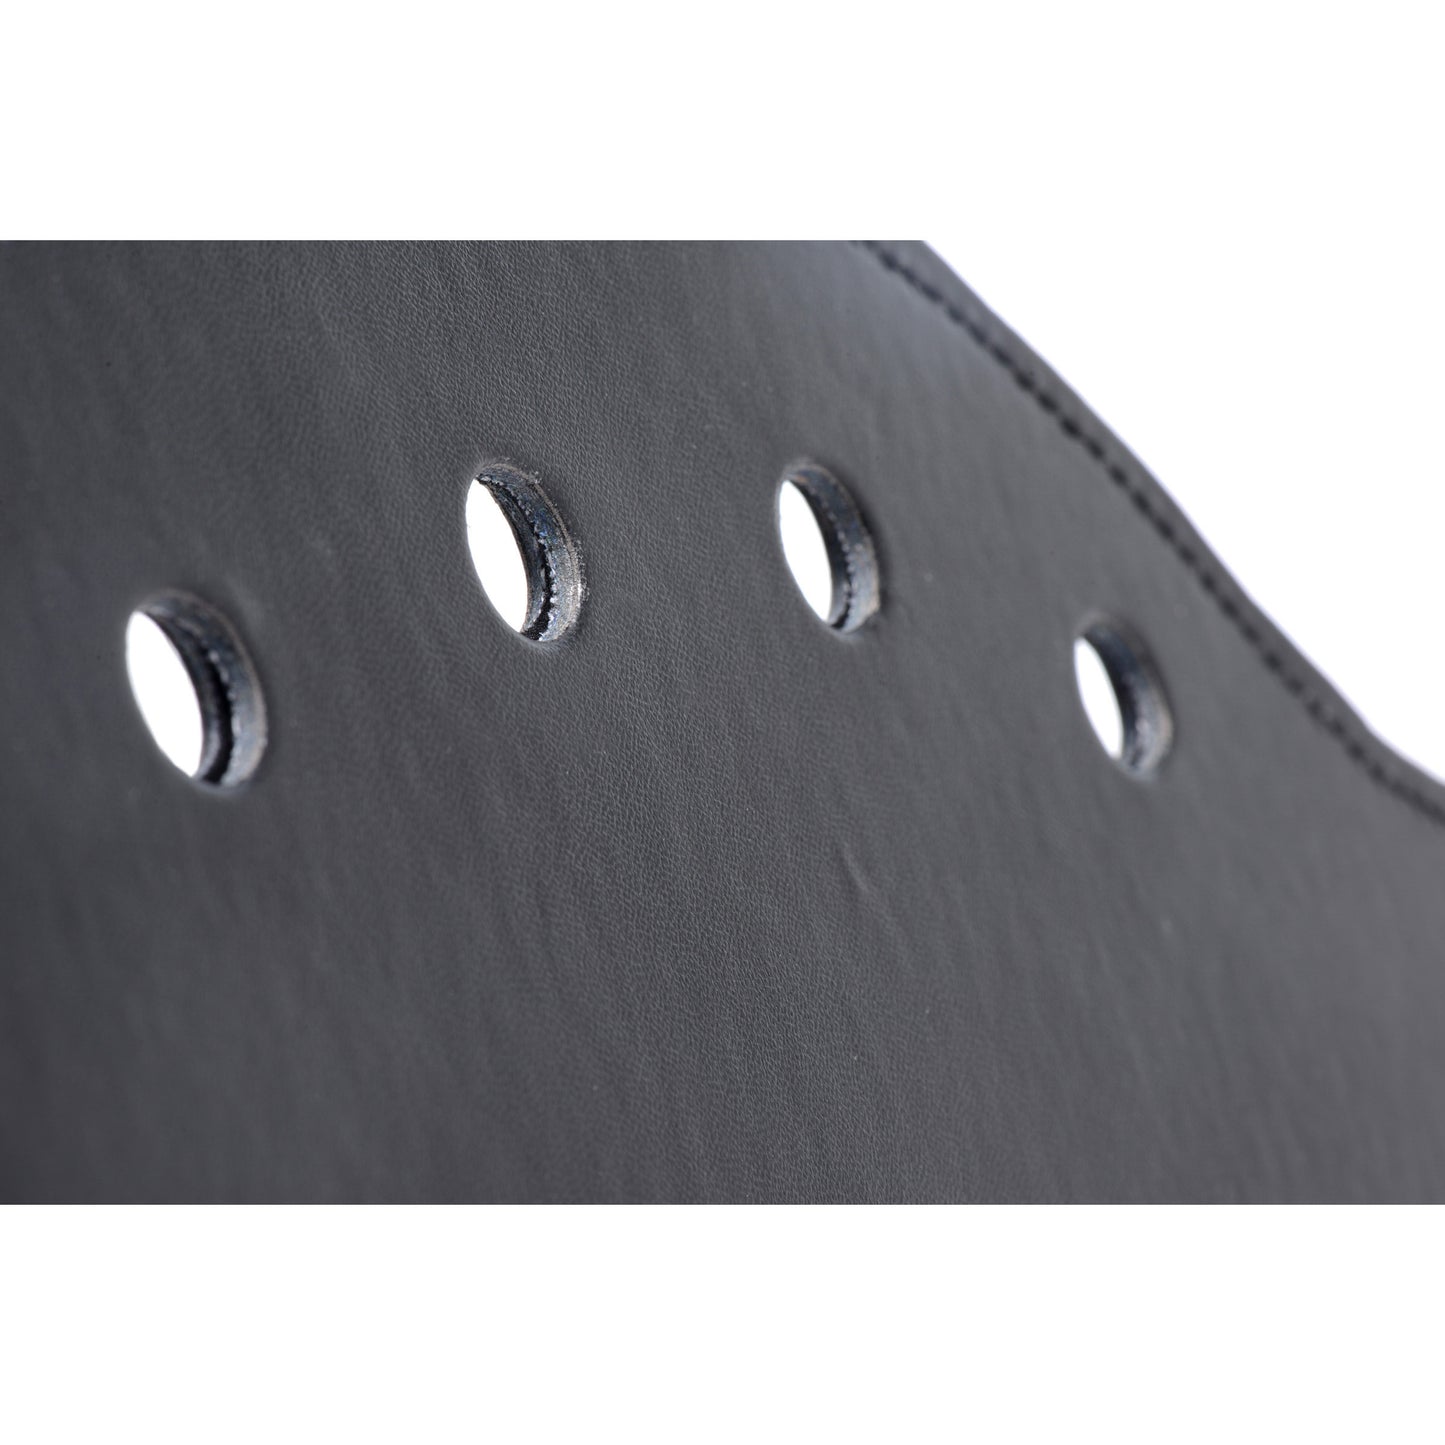 Deluxe Rounded Paddle with Holes - UABDSM